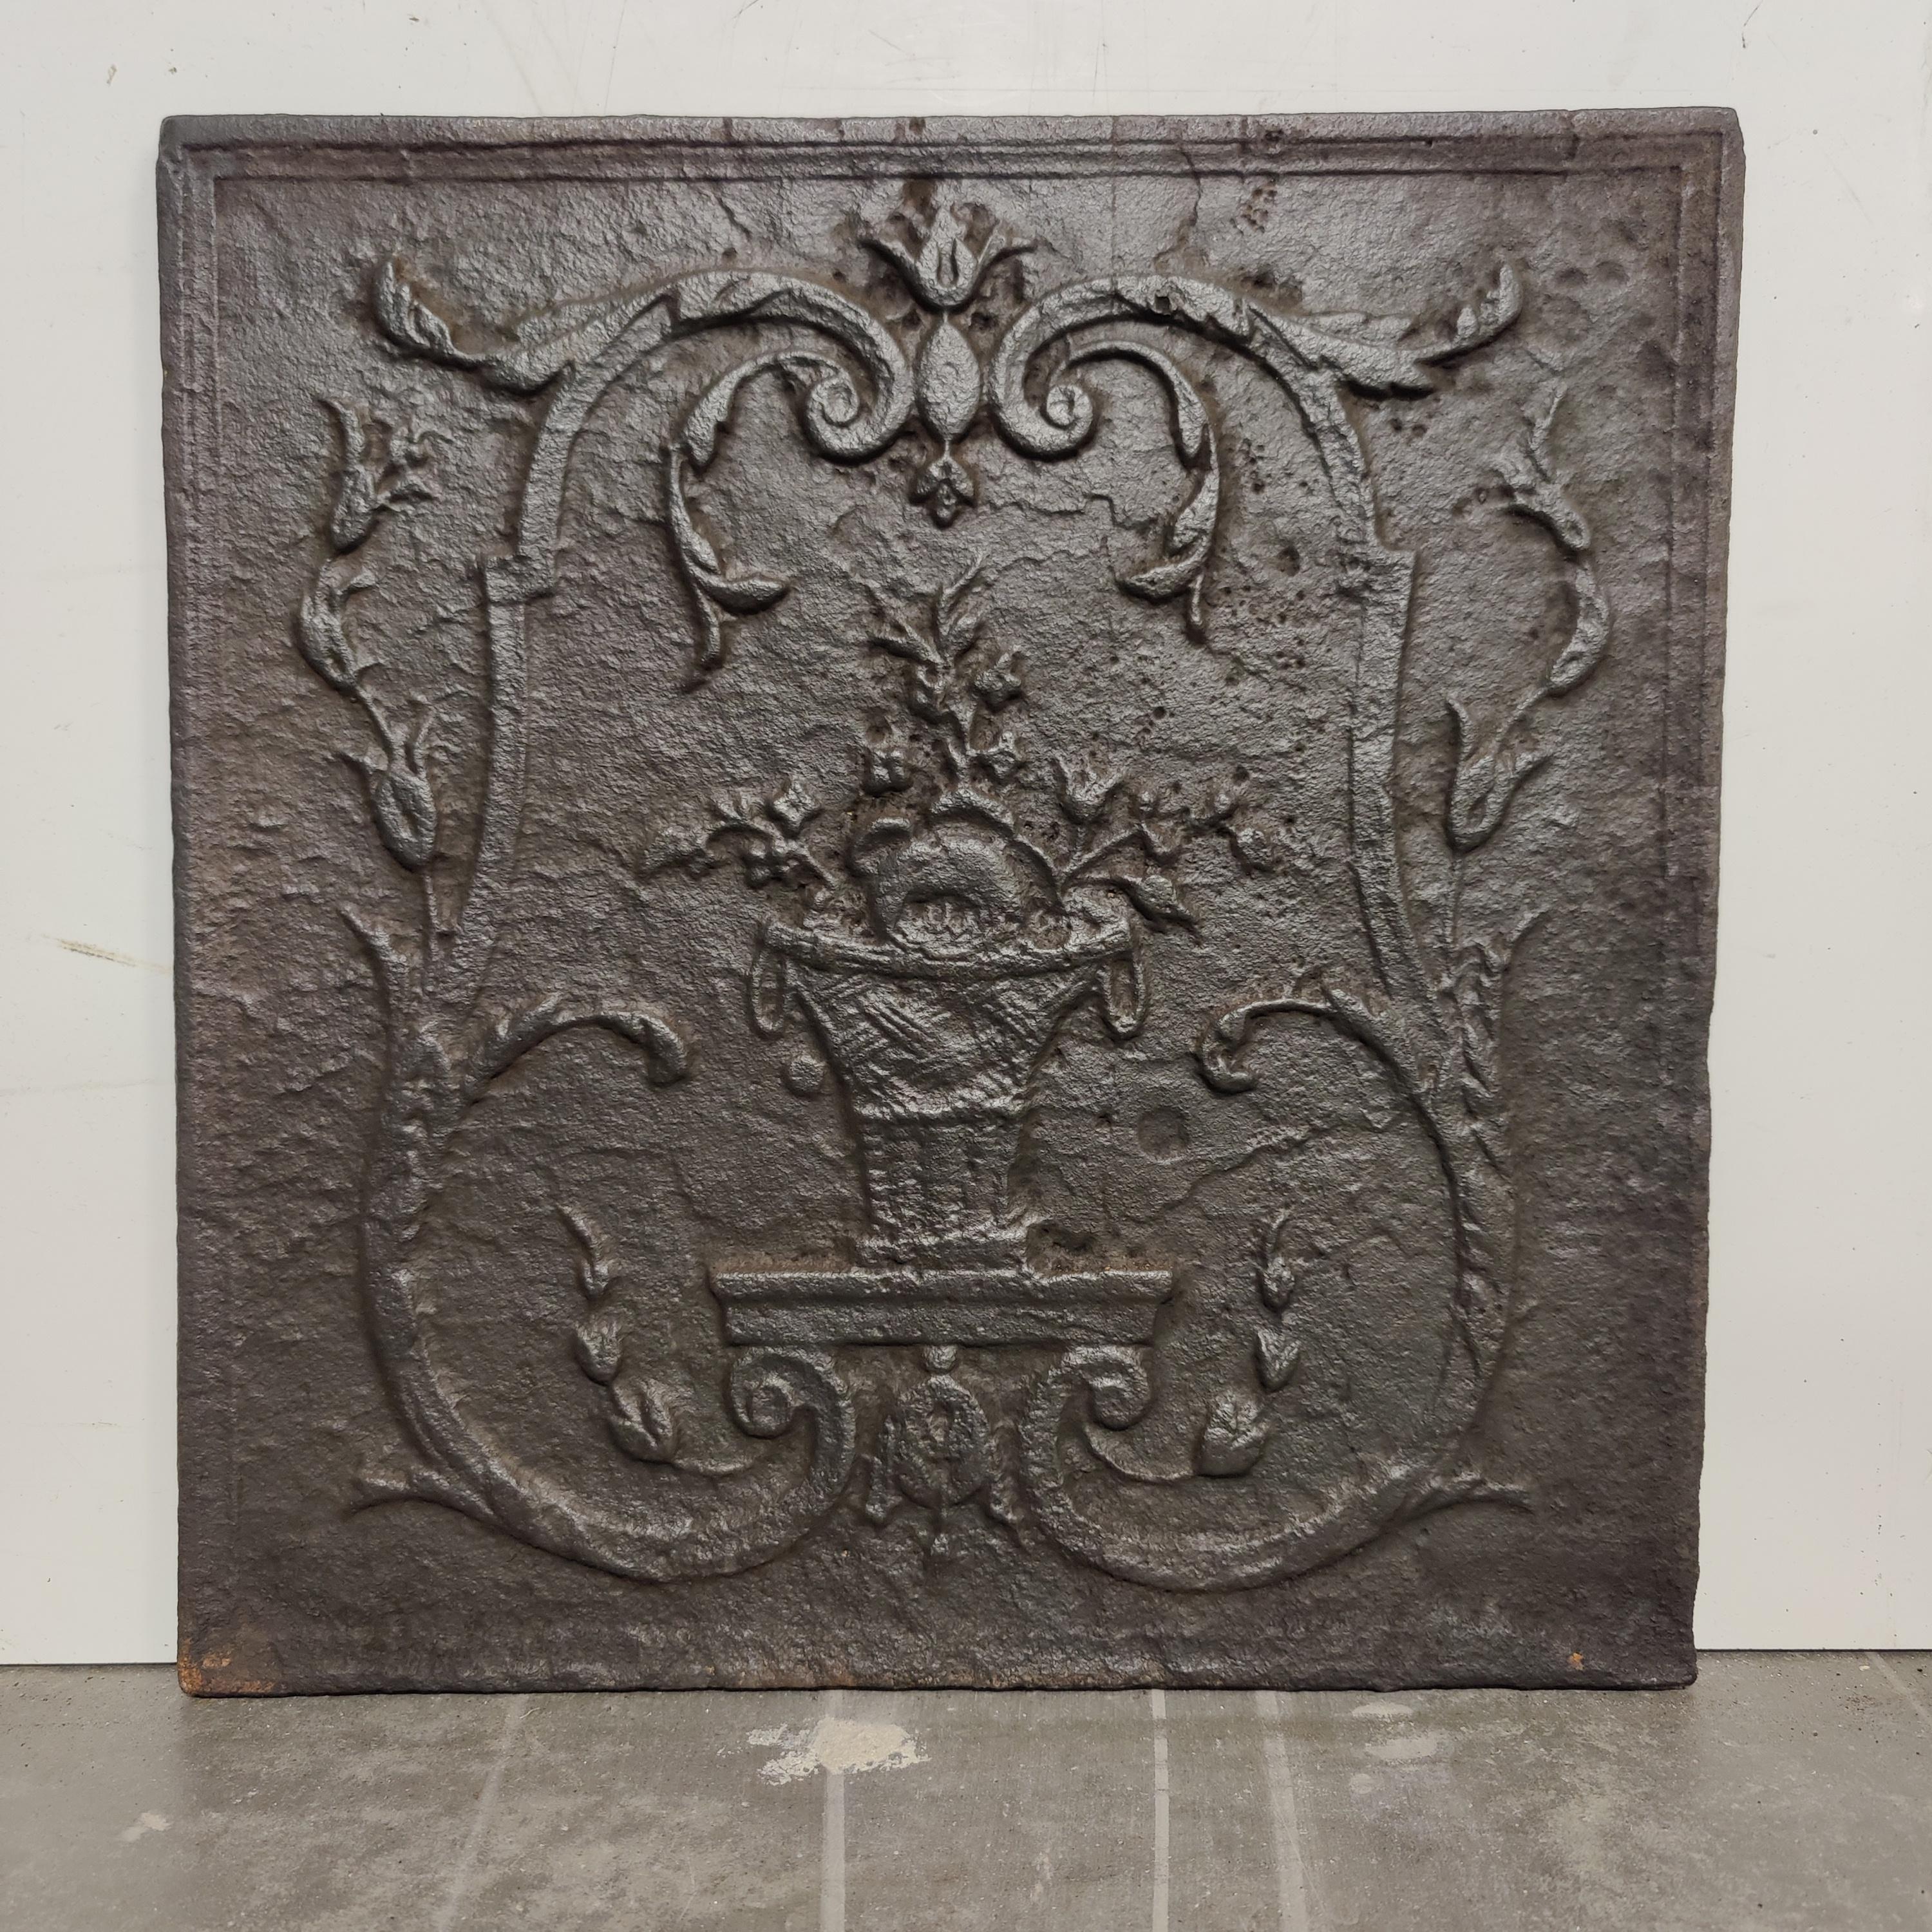 Antique fireback / backsplash, vase with flowers.

Nice square cast iron antique fireback displaying a vase with flowers.
Great condition, can be used in a real gas or log fire.
Very decorative piece.

34 lbs / 15 kg.


 